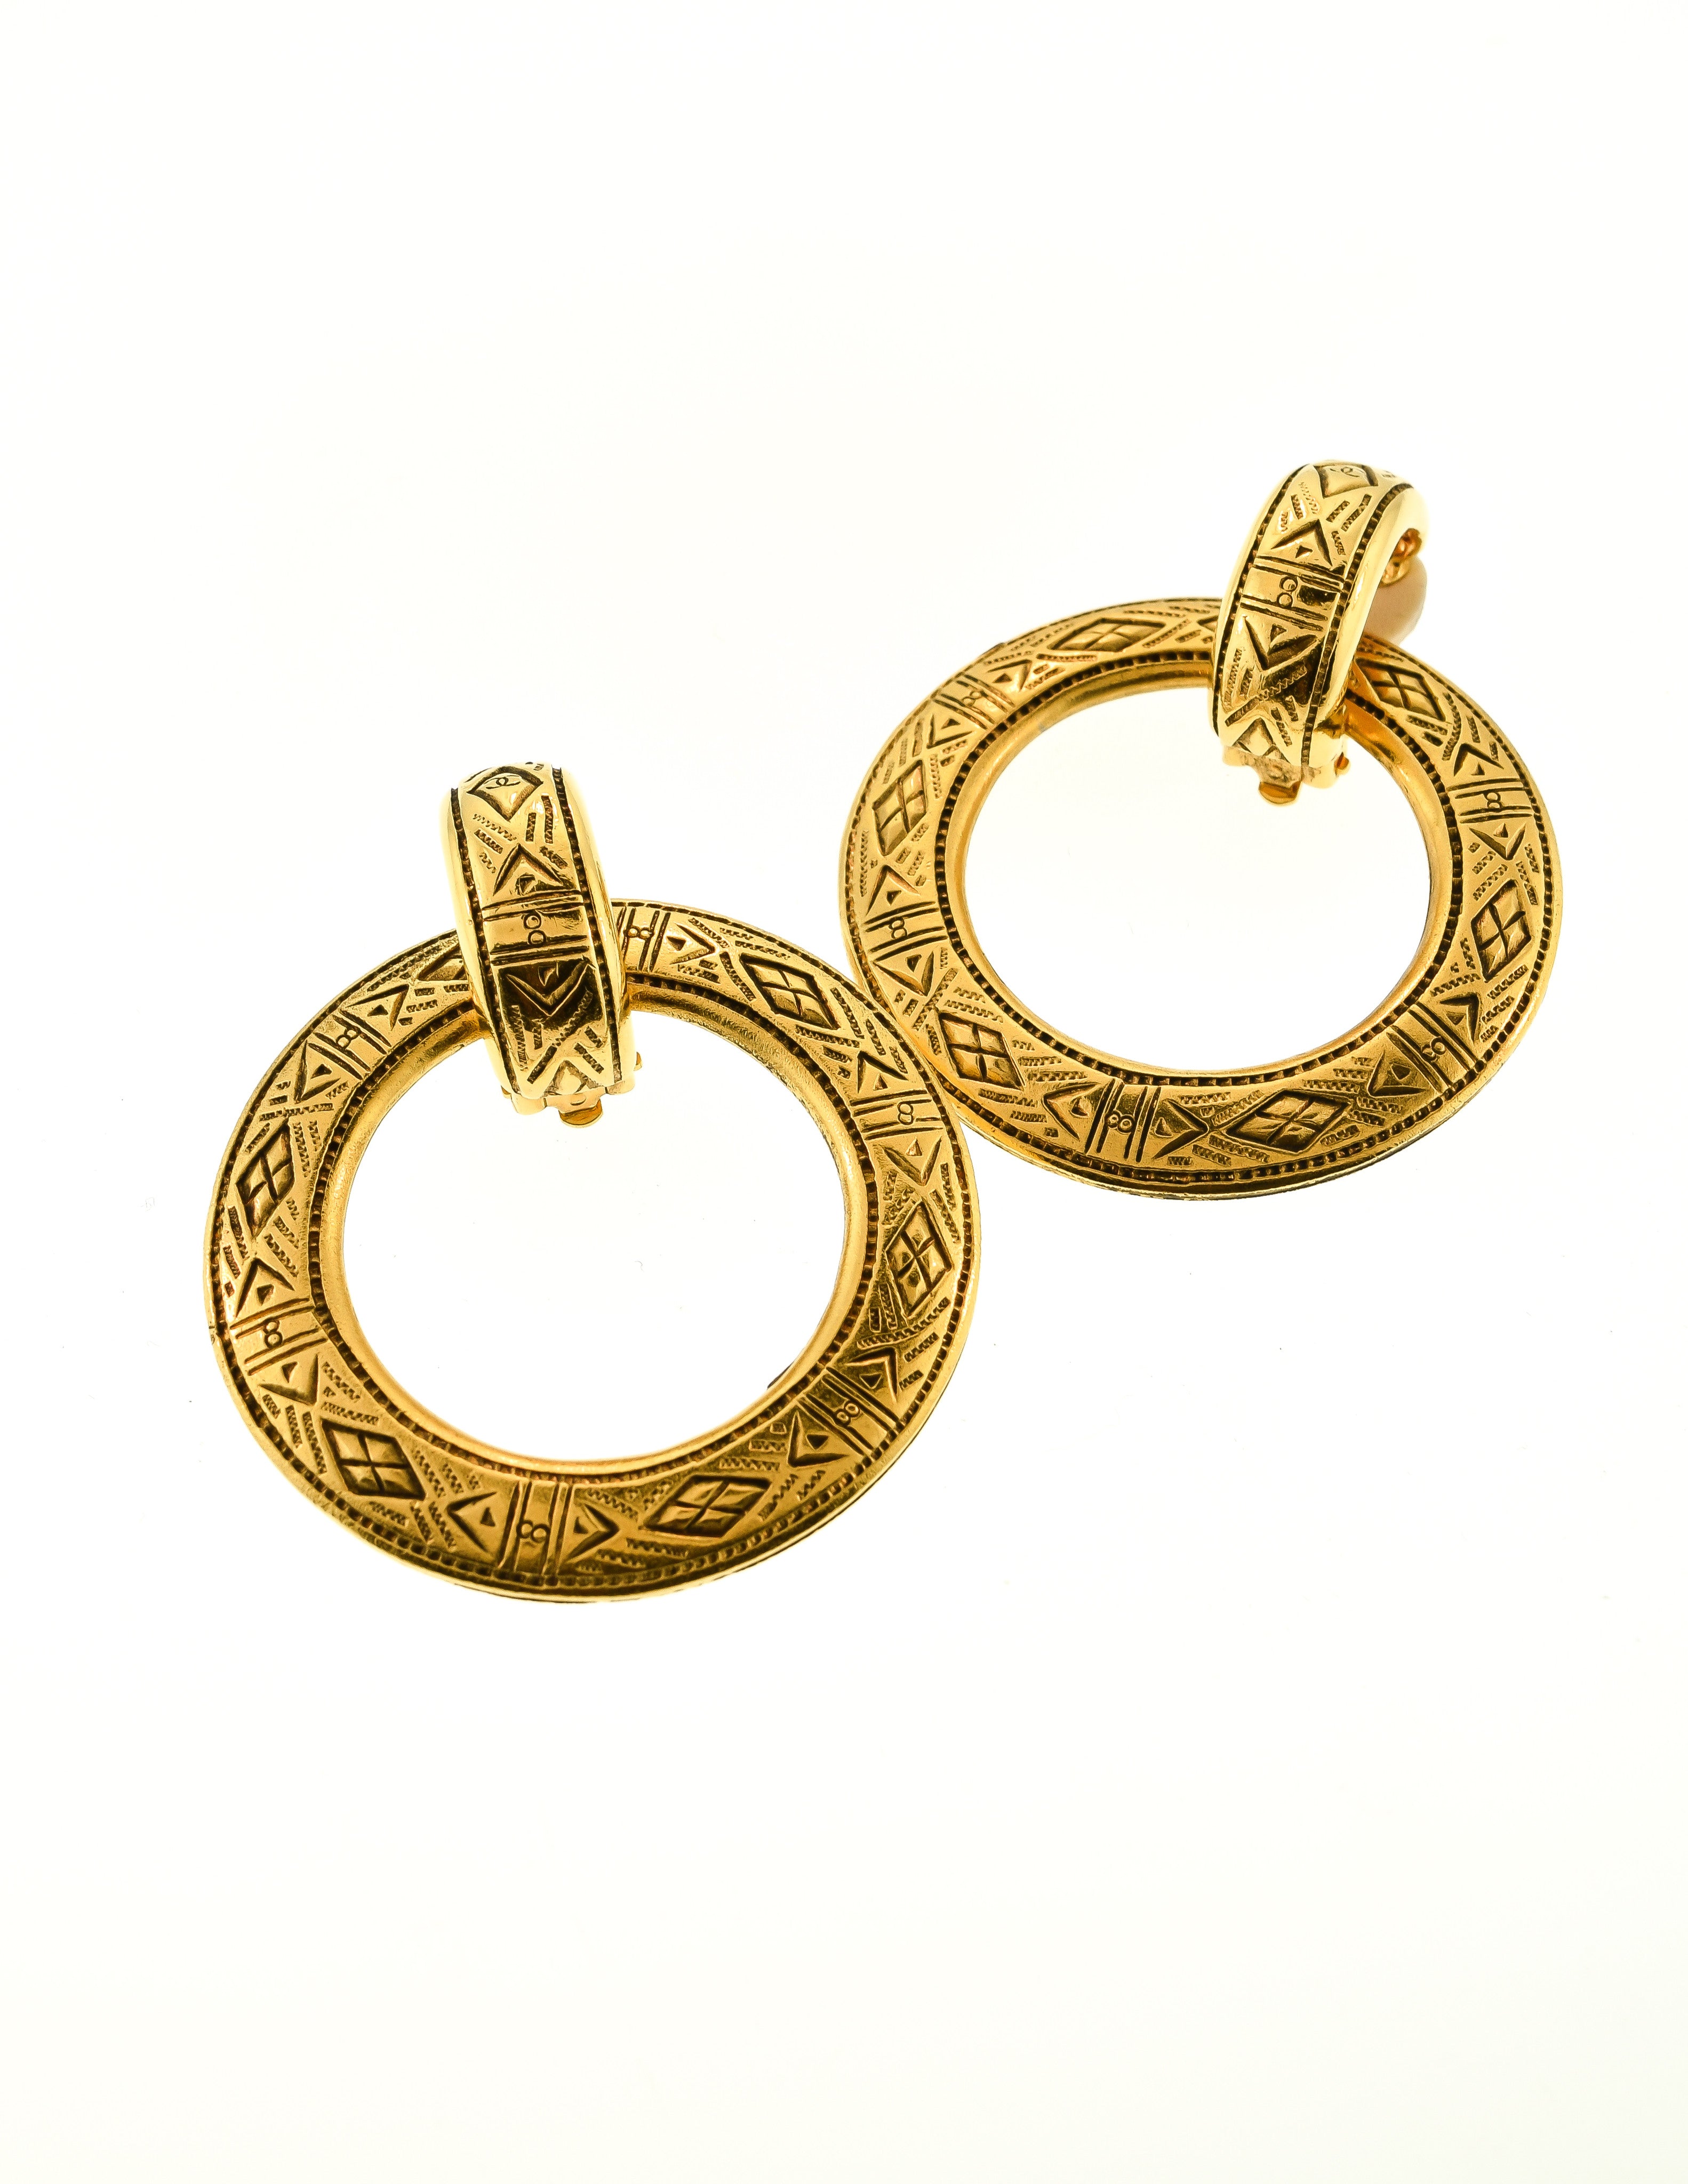 Chanel Vintage Etched Gold Two Piece Hoop Earrings - from Amarcord